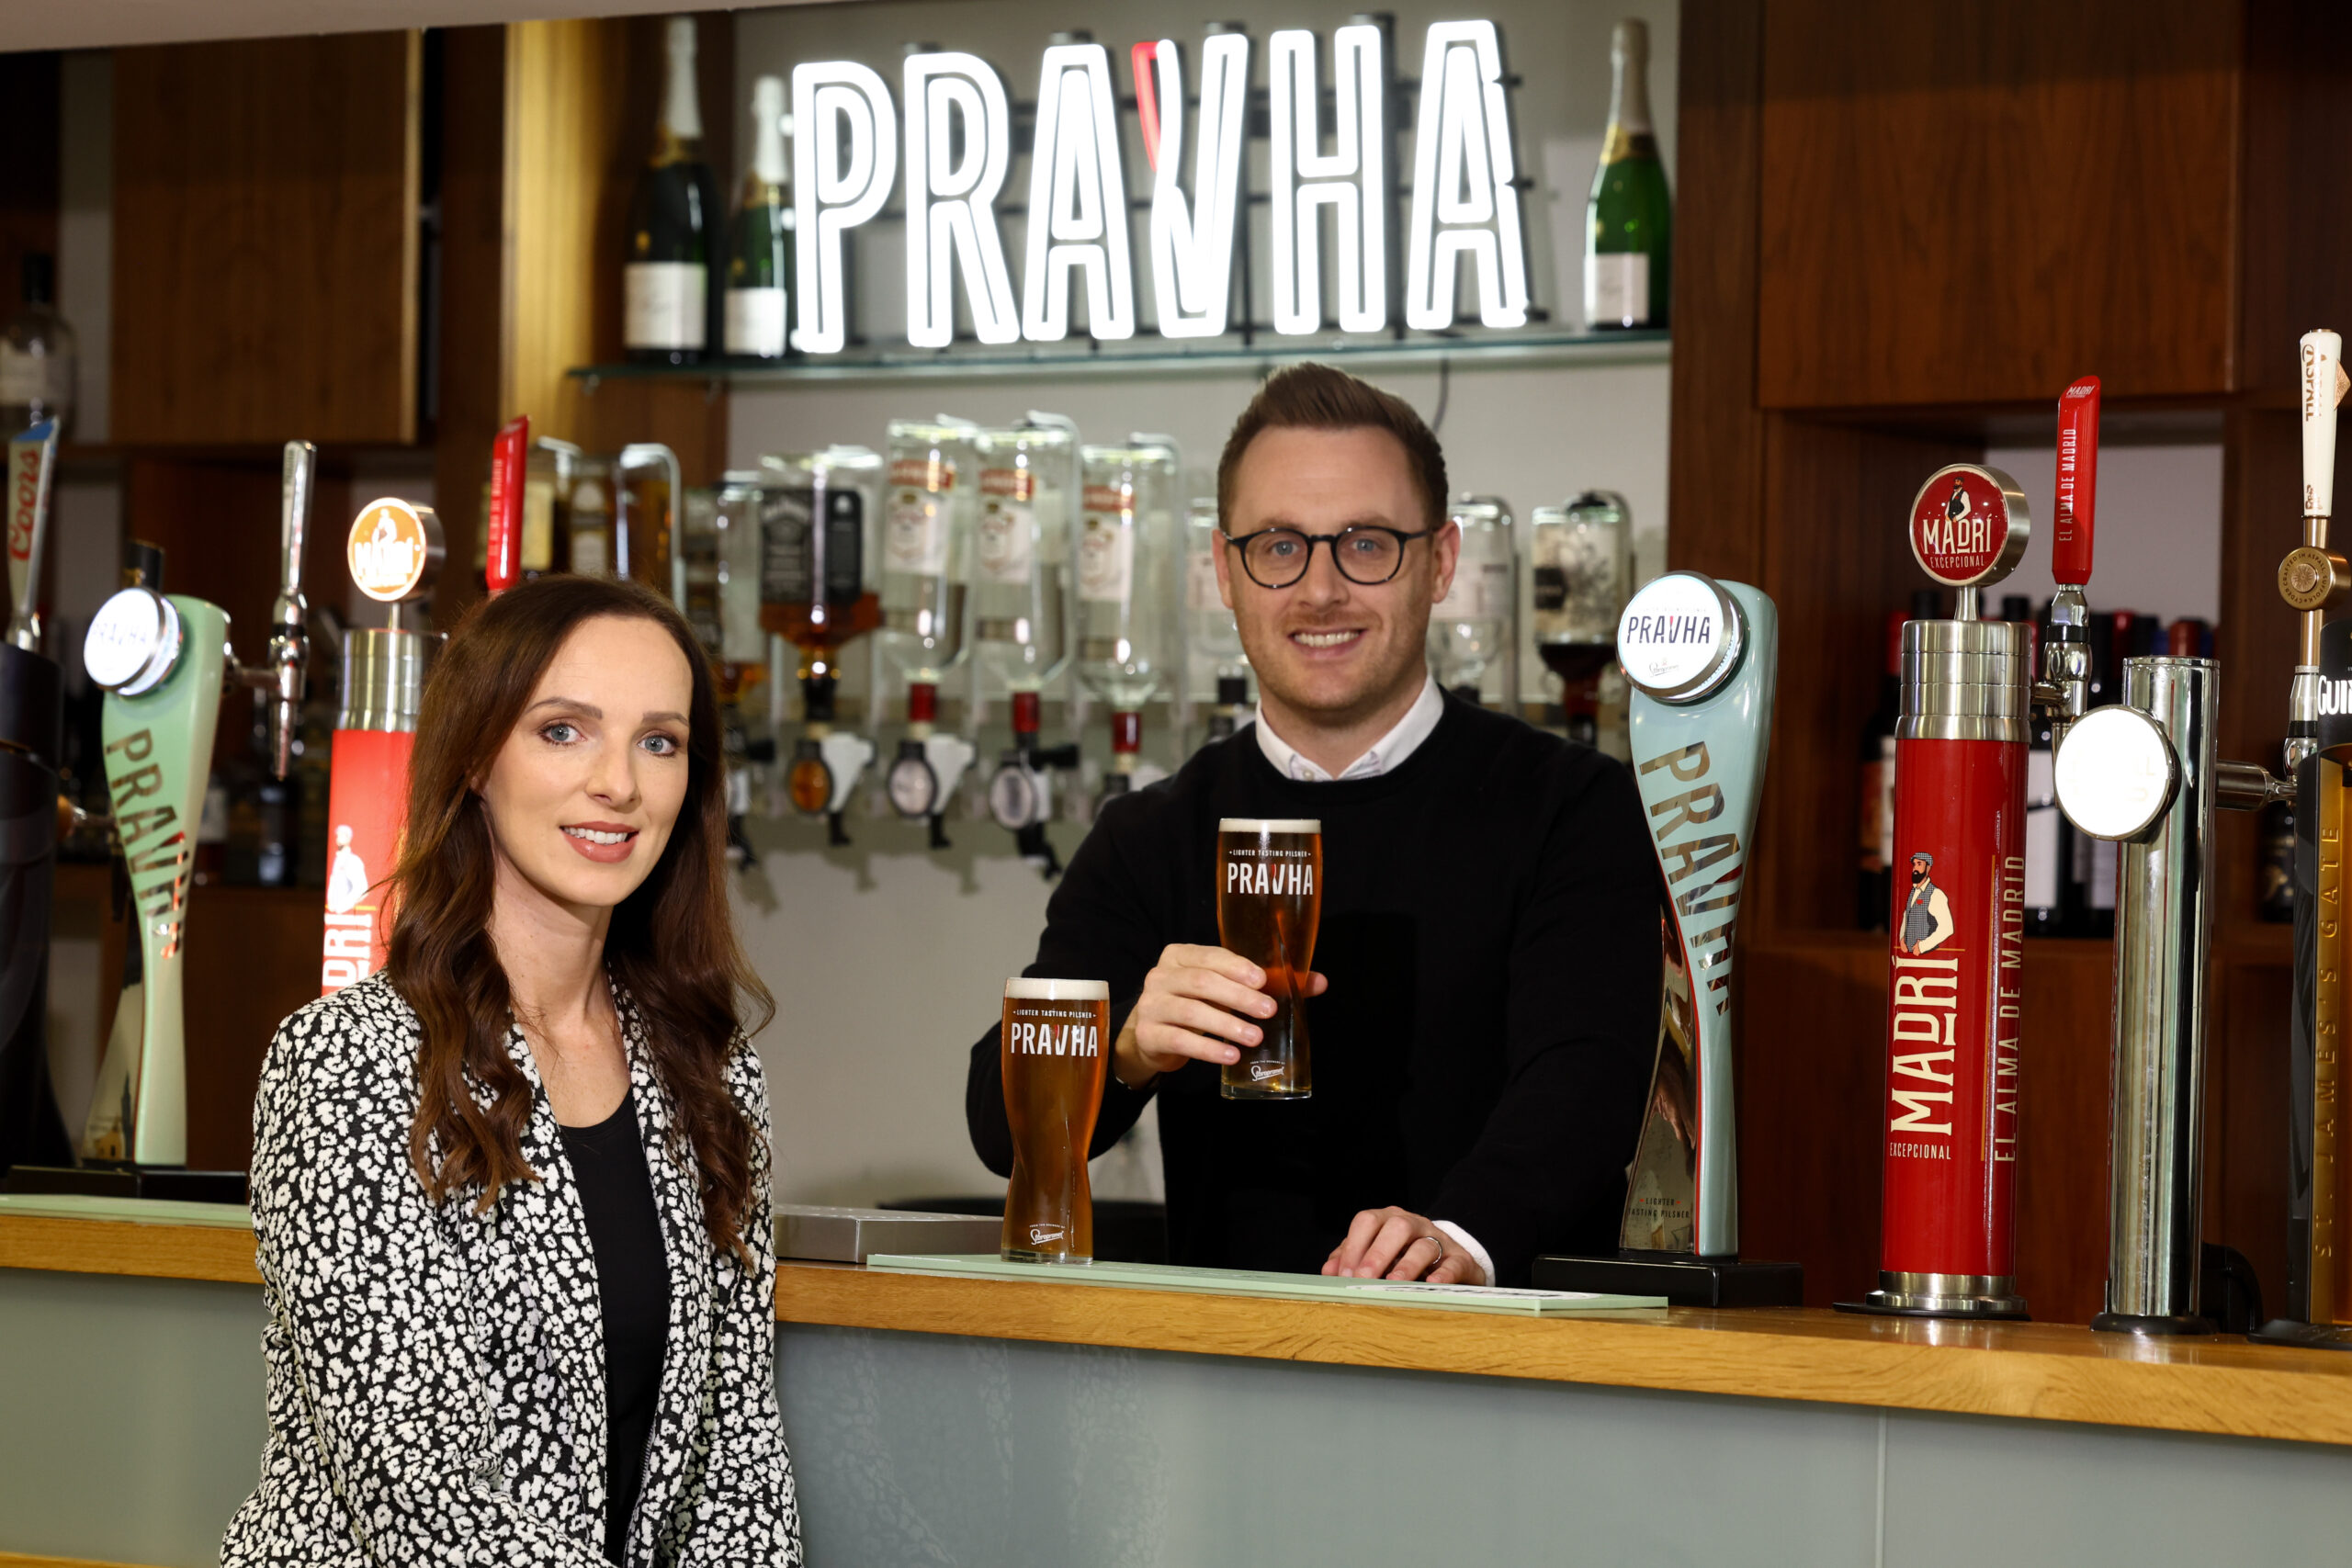 Pravha takes the reins at Down Royal hospitality suite